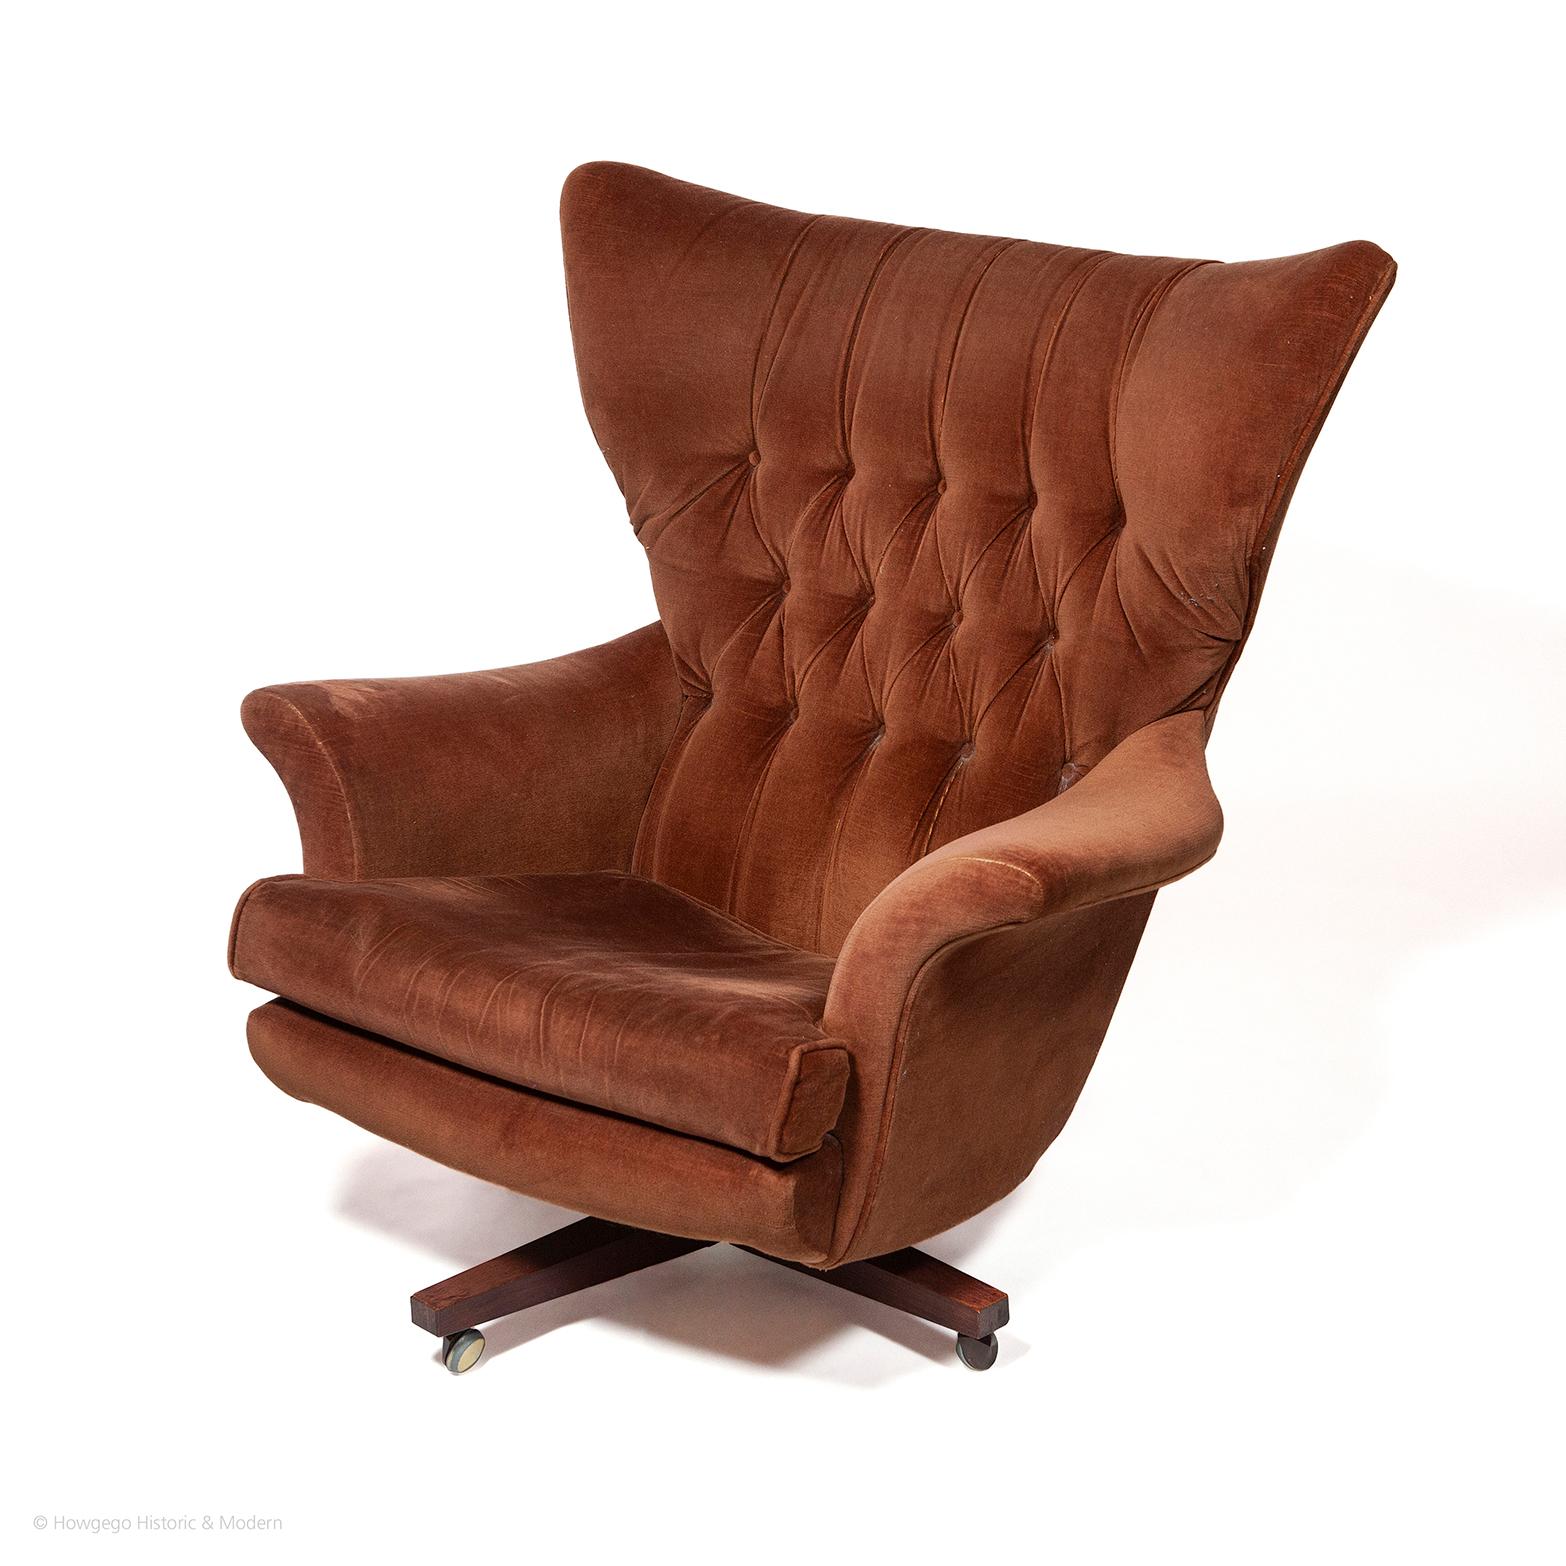 • Model 6250R most comfortable chair is named after the year in which it was designed 1962 by G Plan. It was marketed as 